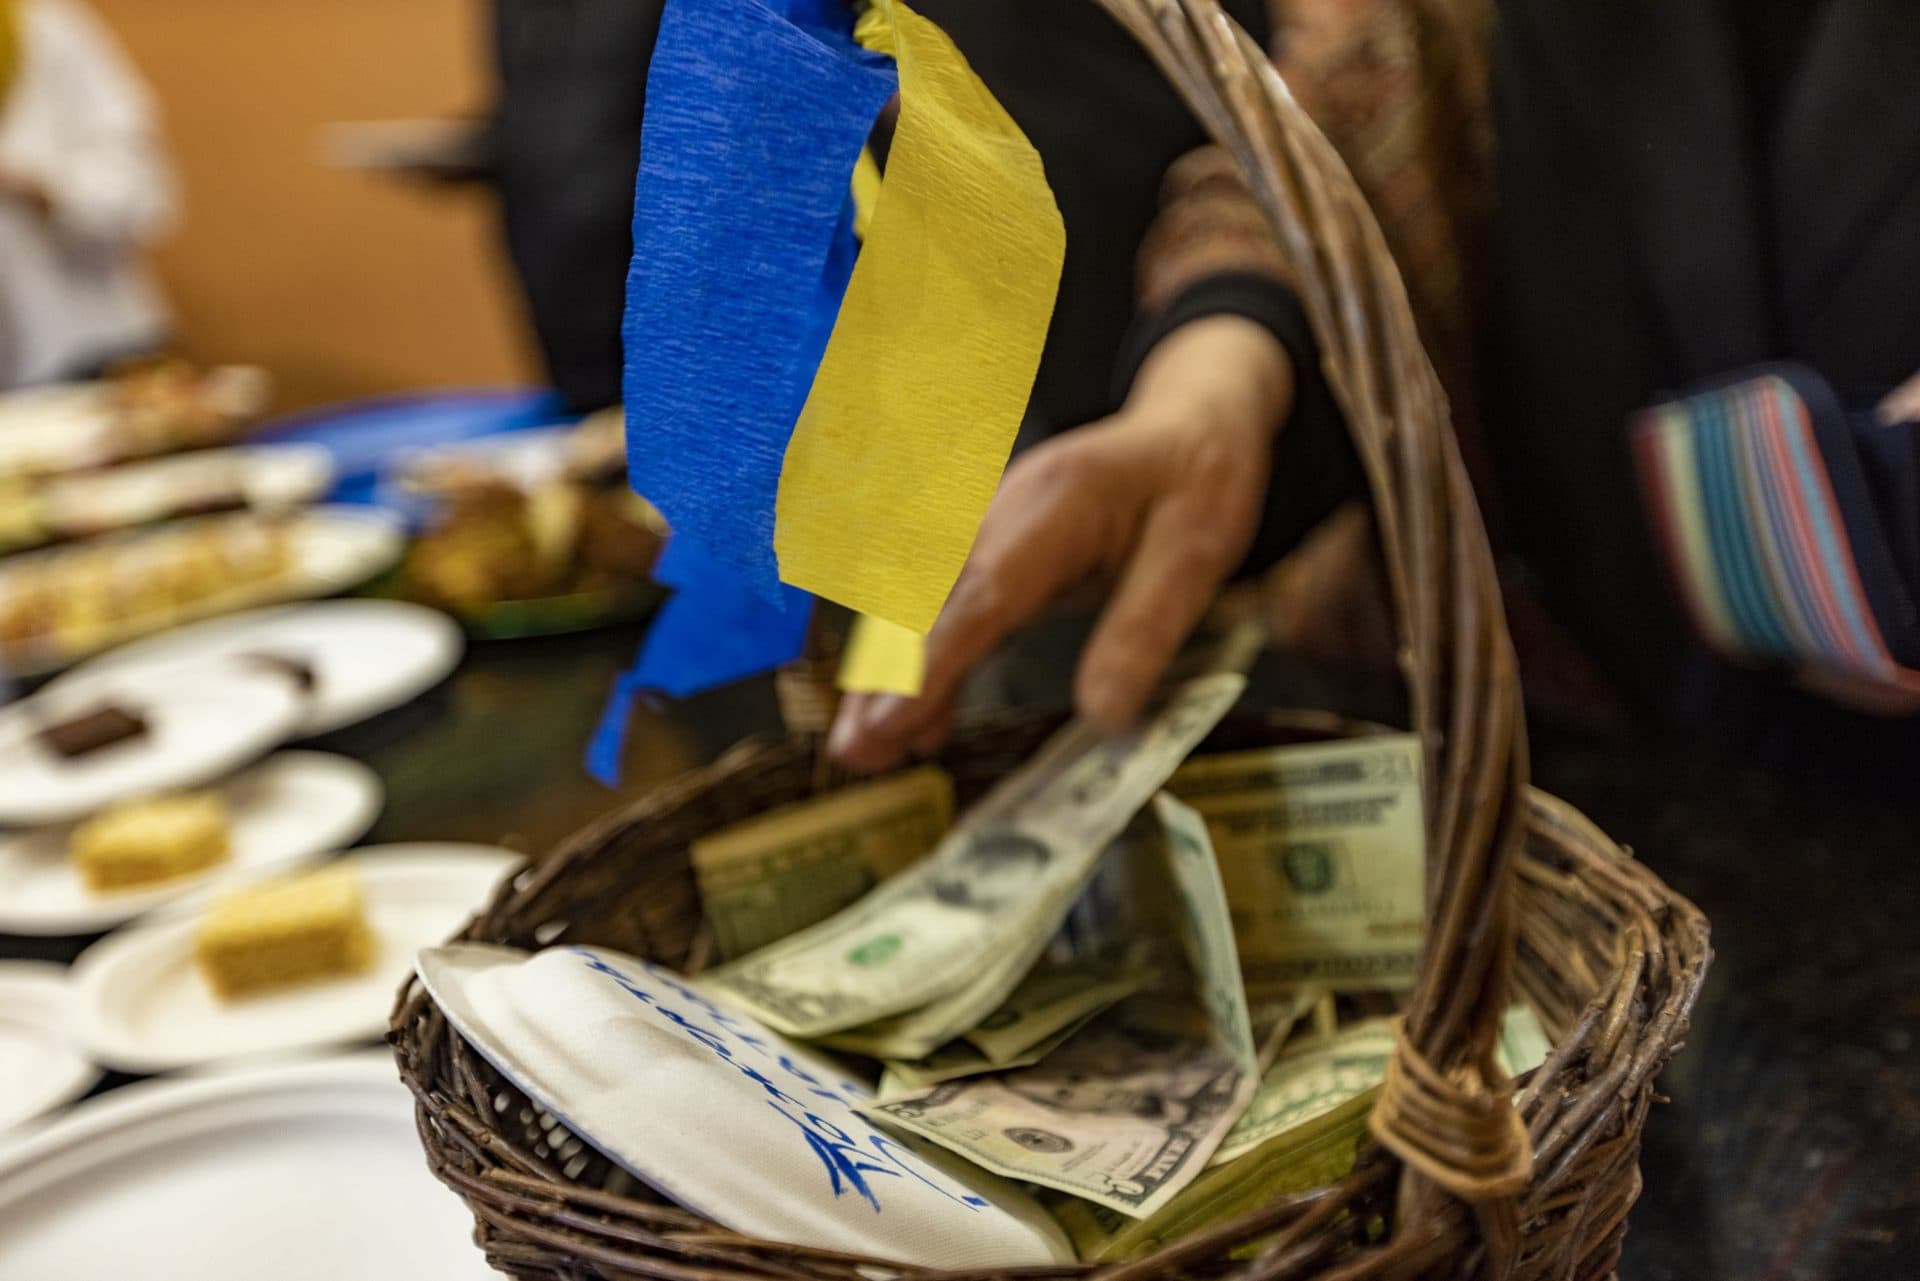 A basket with the colors of the Ukrainian flag filled with donations for Ukraine at Christ the King Ukrainian Catholic Church in Jamaica Plain. (Jesse Costa/WBUR)